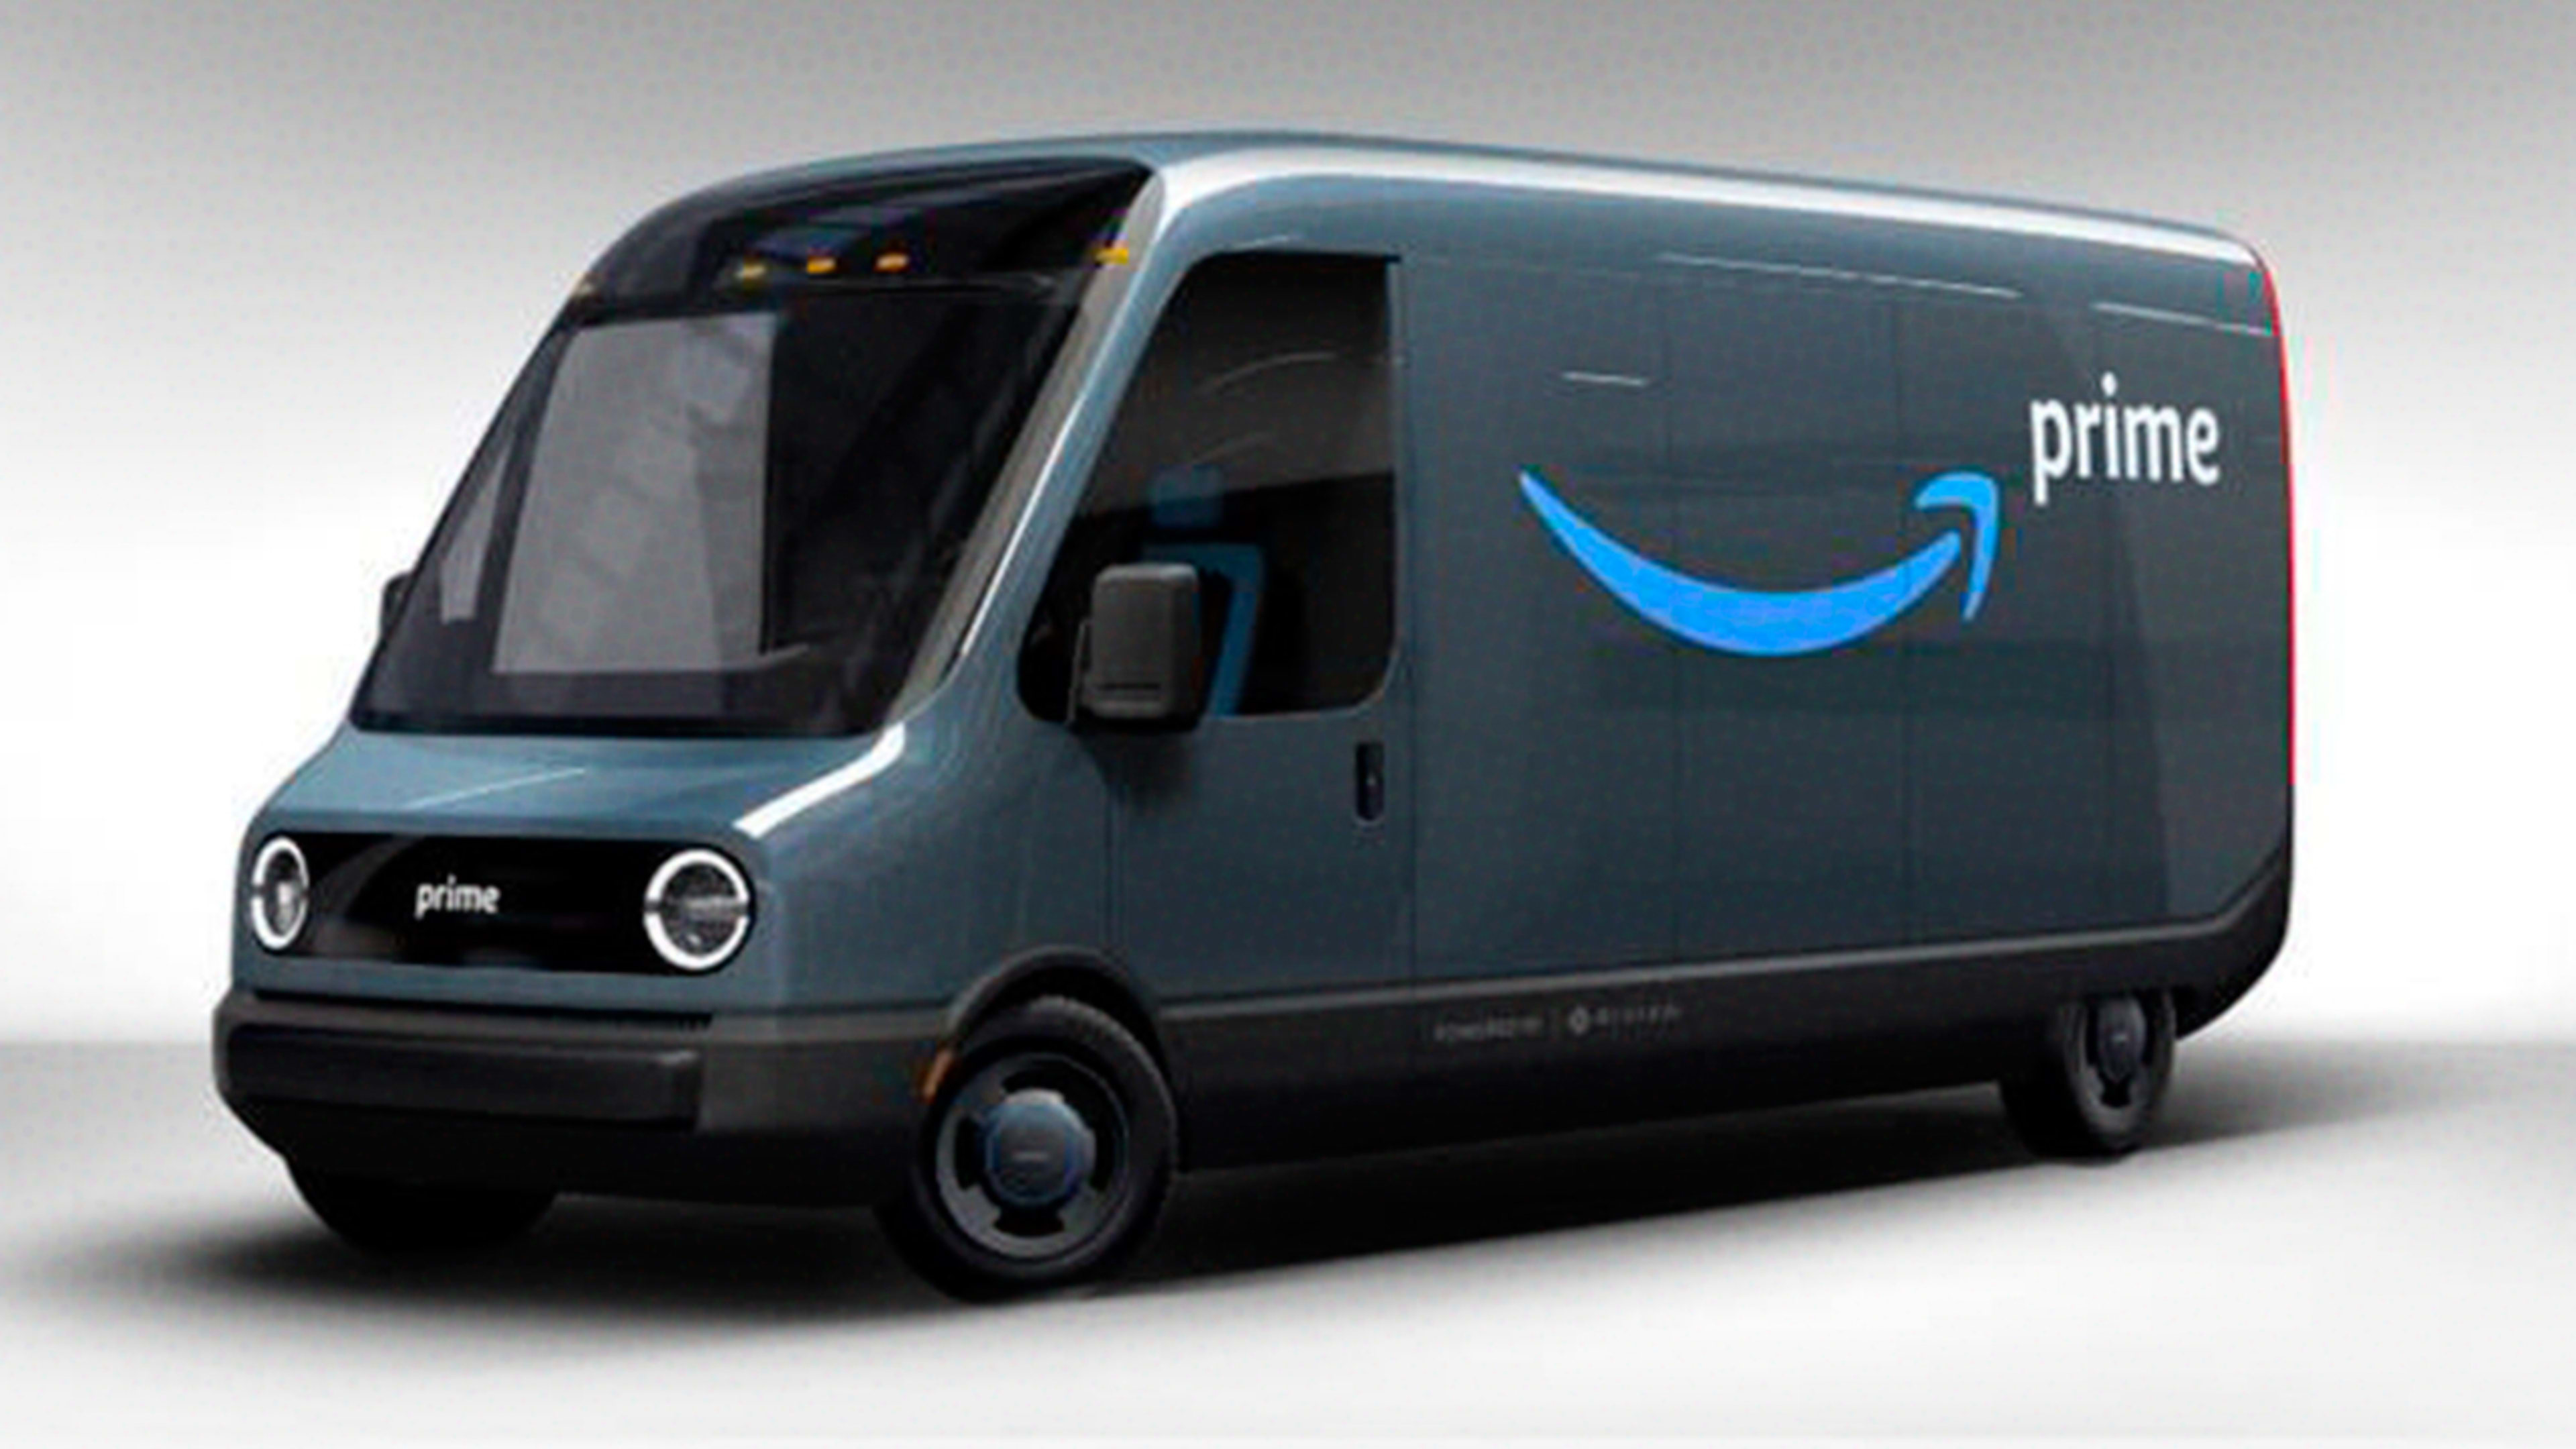 Amazon plans to have 100,000 electric delivery vans on the road by 2030